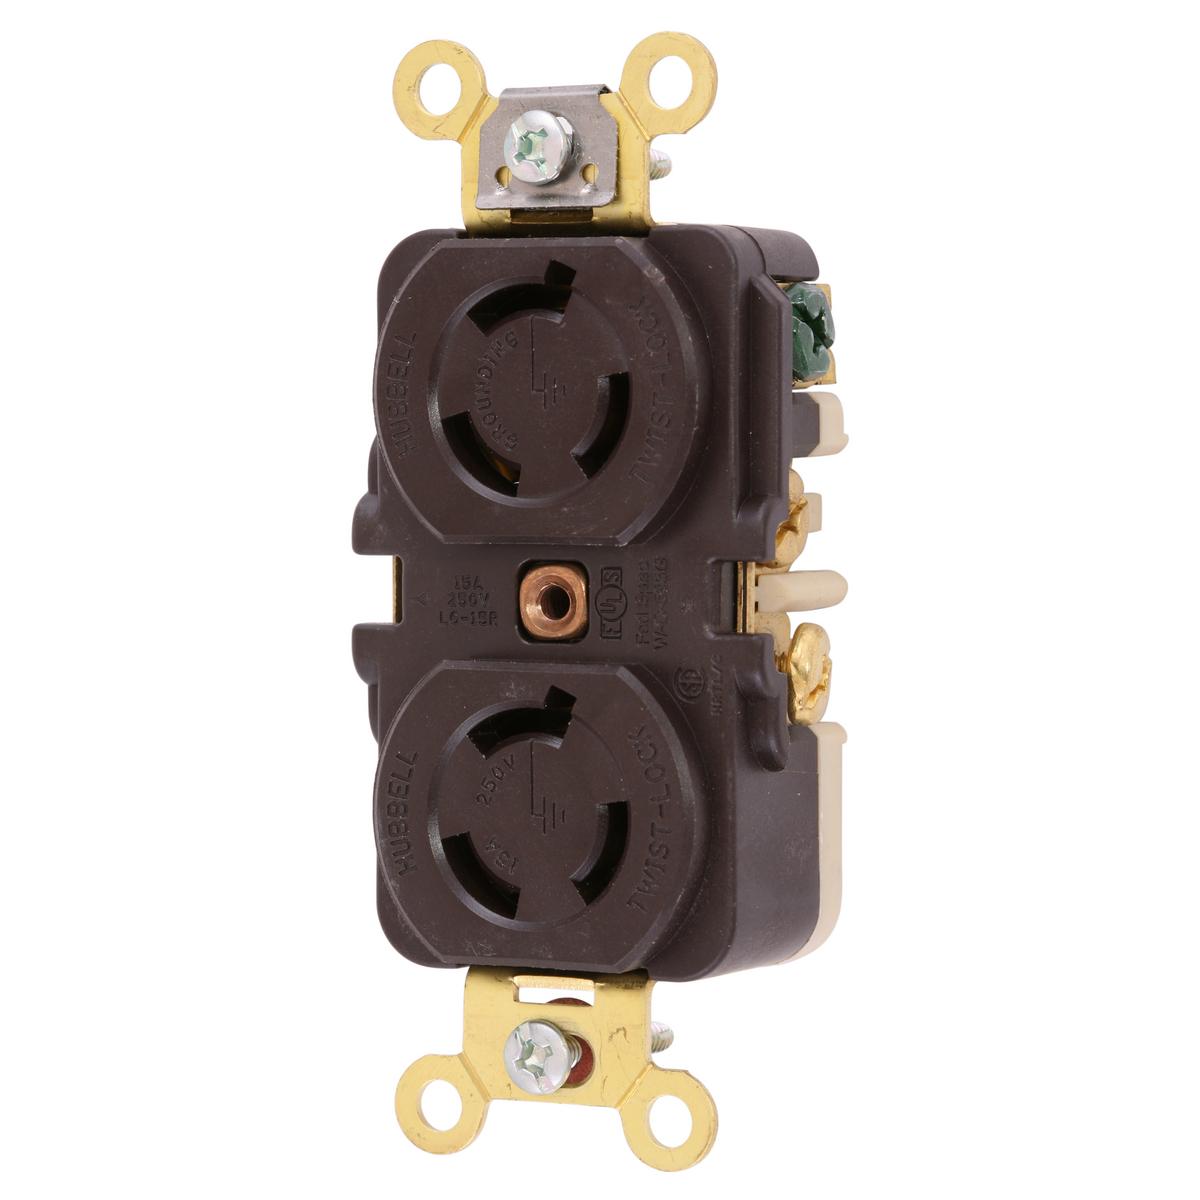 Hubbell HBL4550 Locking Devices, Twist-Lock®, Industrial, Duplex Flush Receptacle, 15A 250V, 2-Pole 3-Wire Grounding, NEMA L6-15R, Screw Terminal, Brown.  ; Reinforced thermoplastic construction ; Single piece, all brass contacts ; Single point break-off tabs ; Mounting 